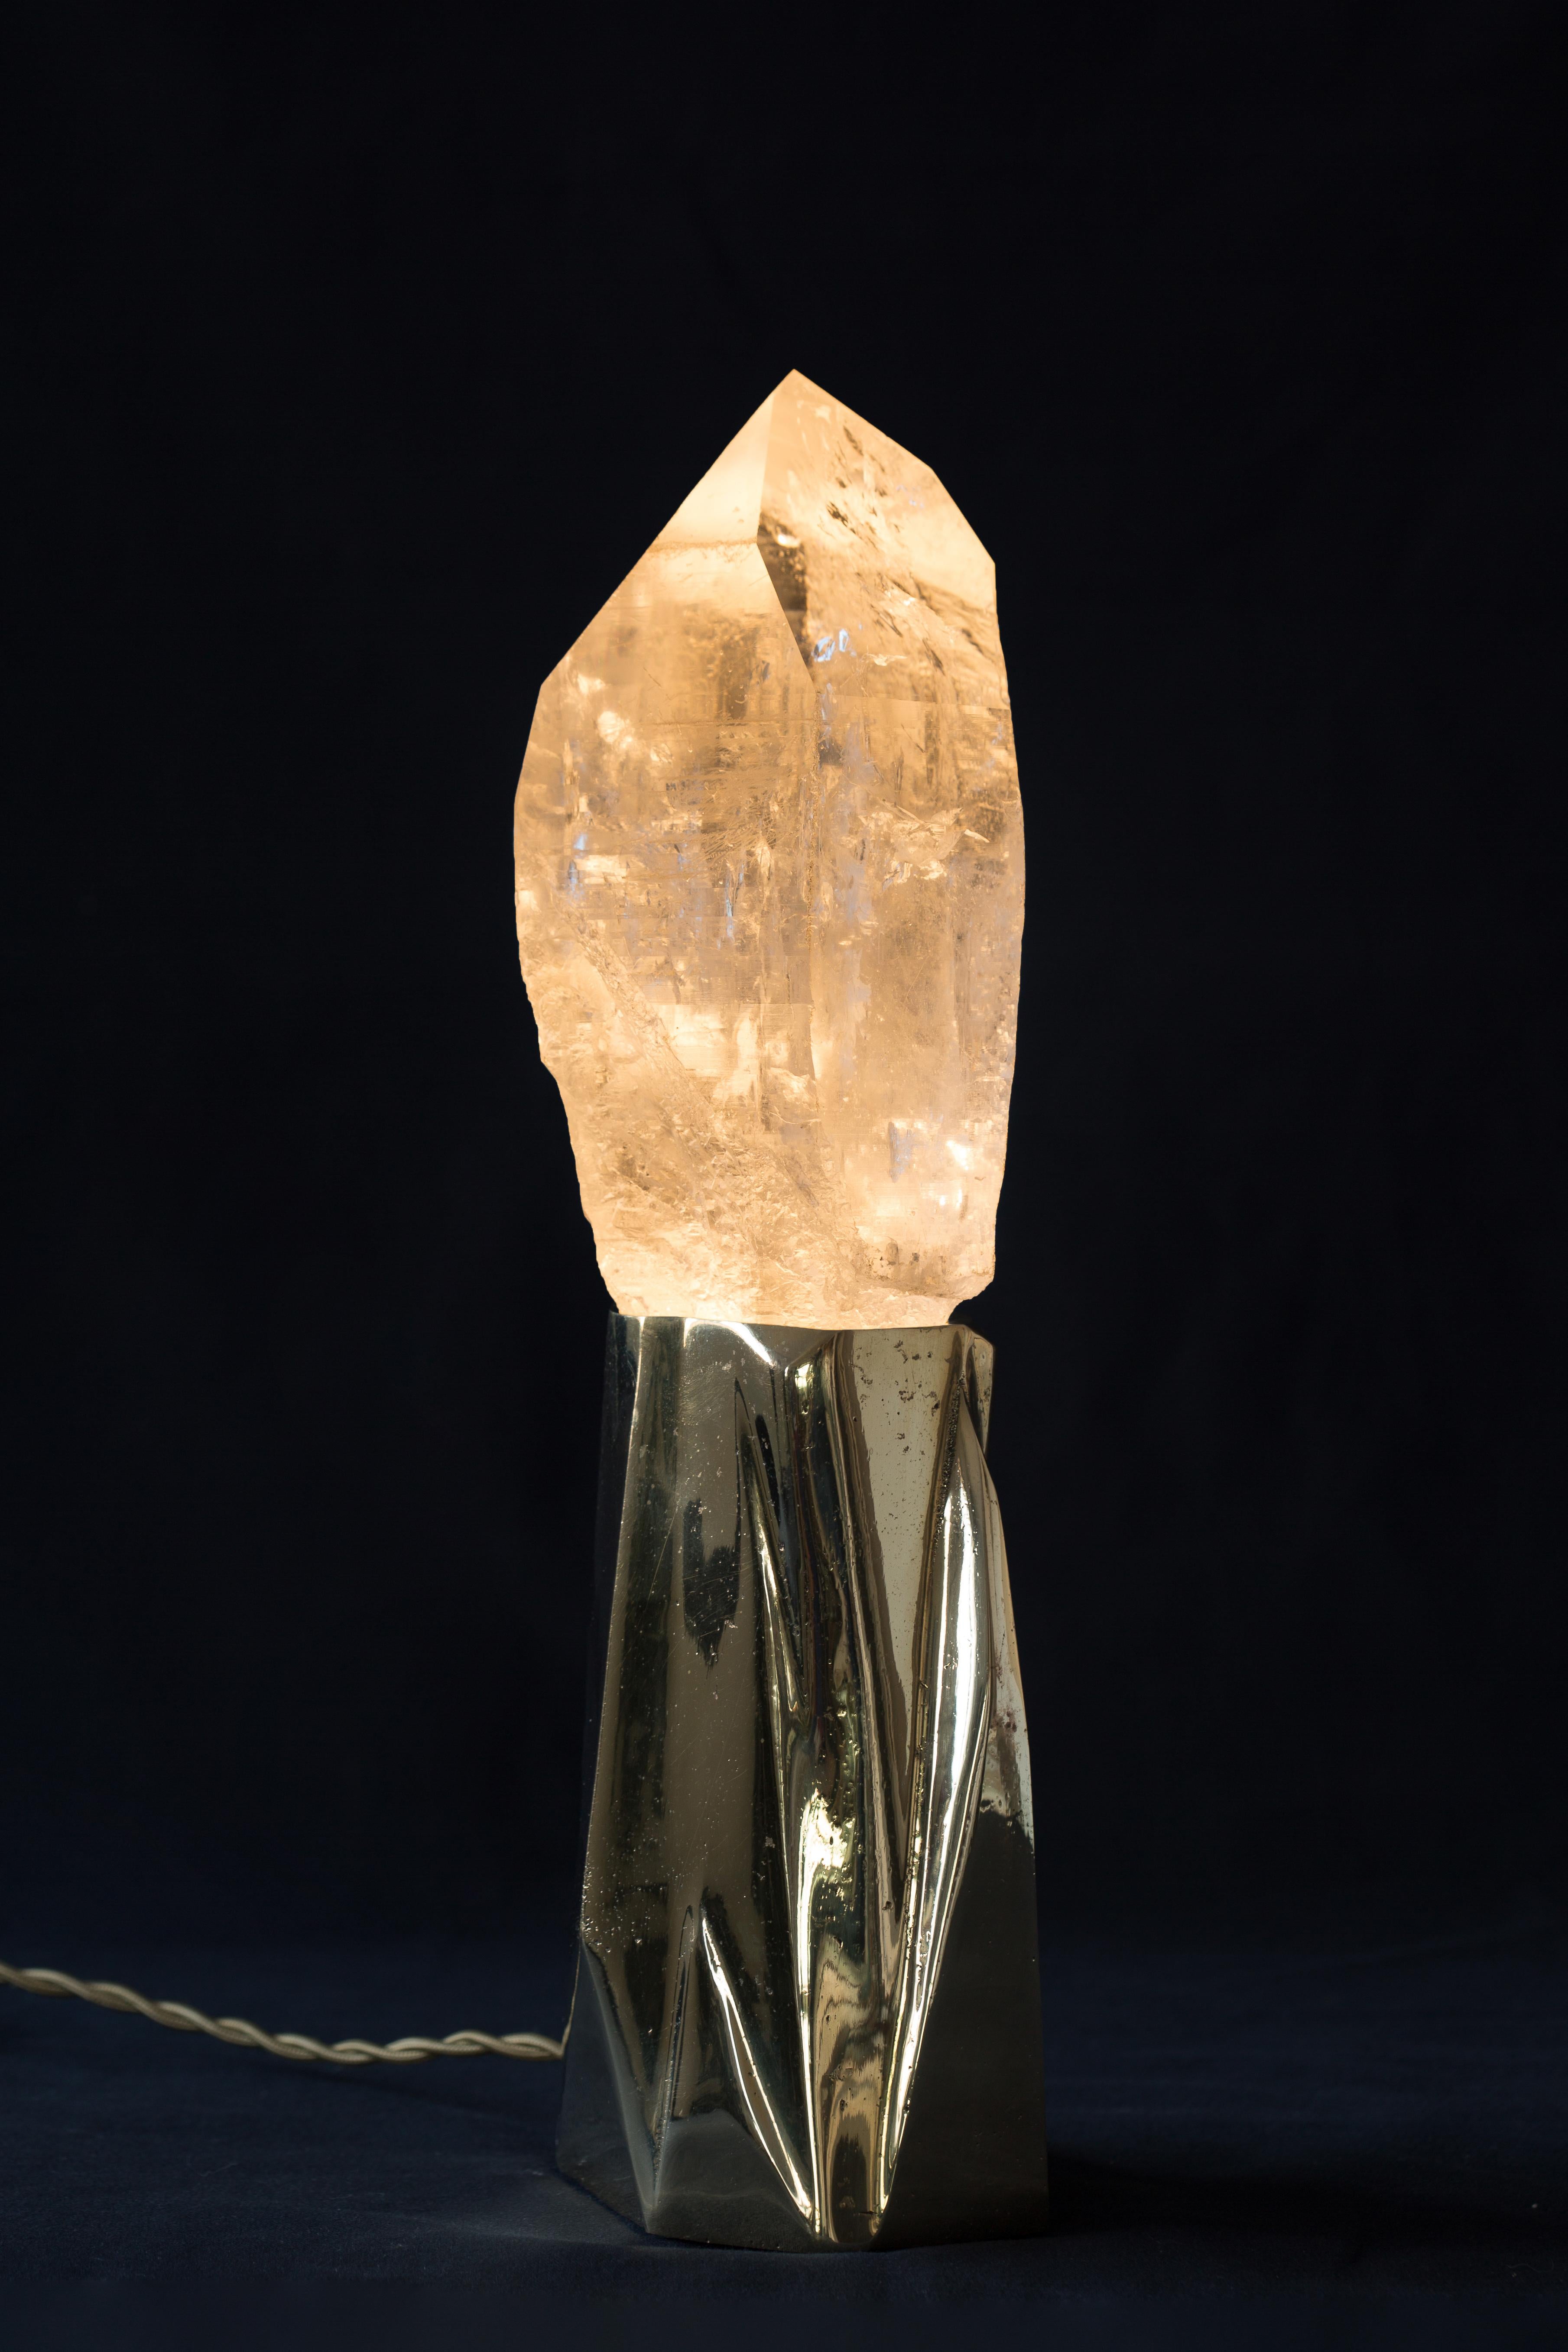 Misty natural quartz table lamp by Demian Quincke
Dimensions: diameter 13 x height 41 cm
Materials: Casted bronze, natural quartz point with bud

5 W, GU-10 Led light inside, Bi-Volt 110/220 V
3.6 kg natural quartz point, 2.7 kg casted bronze base,